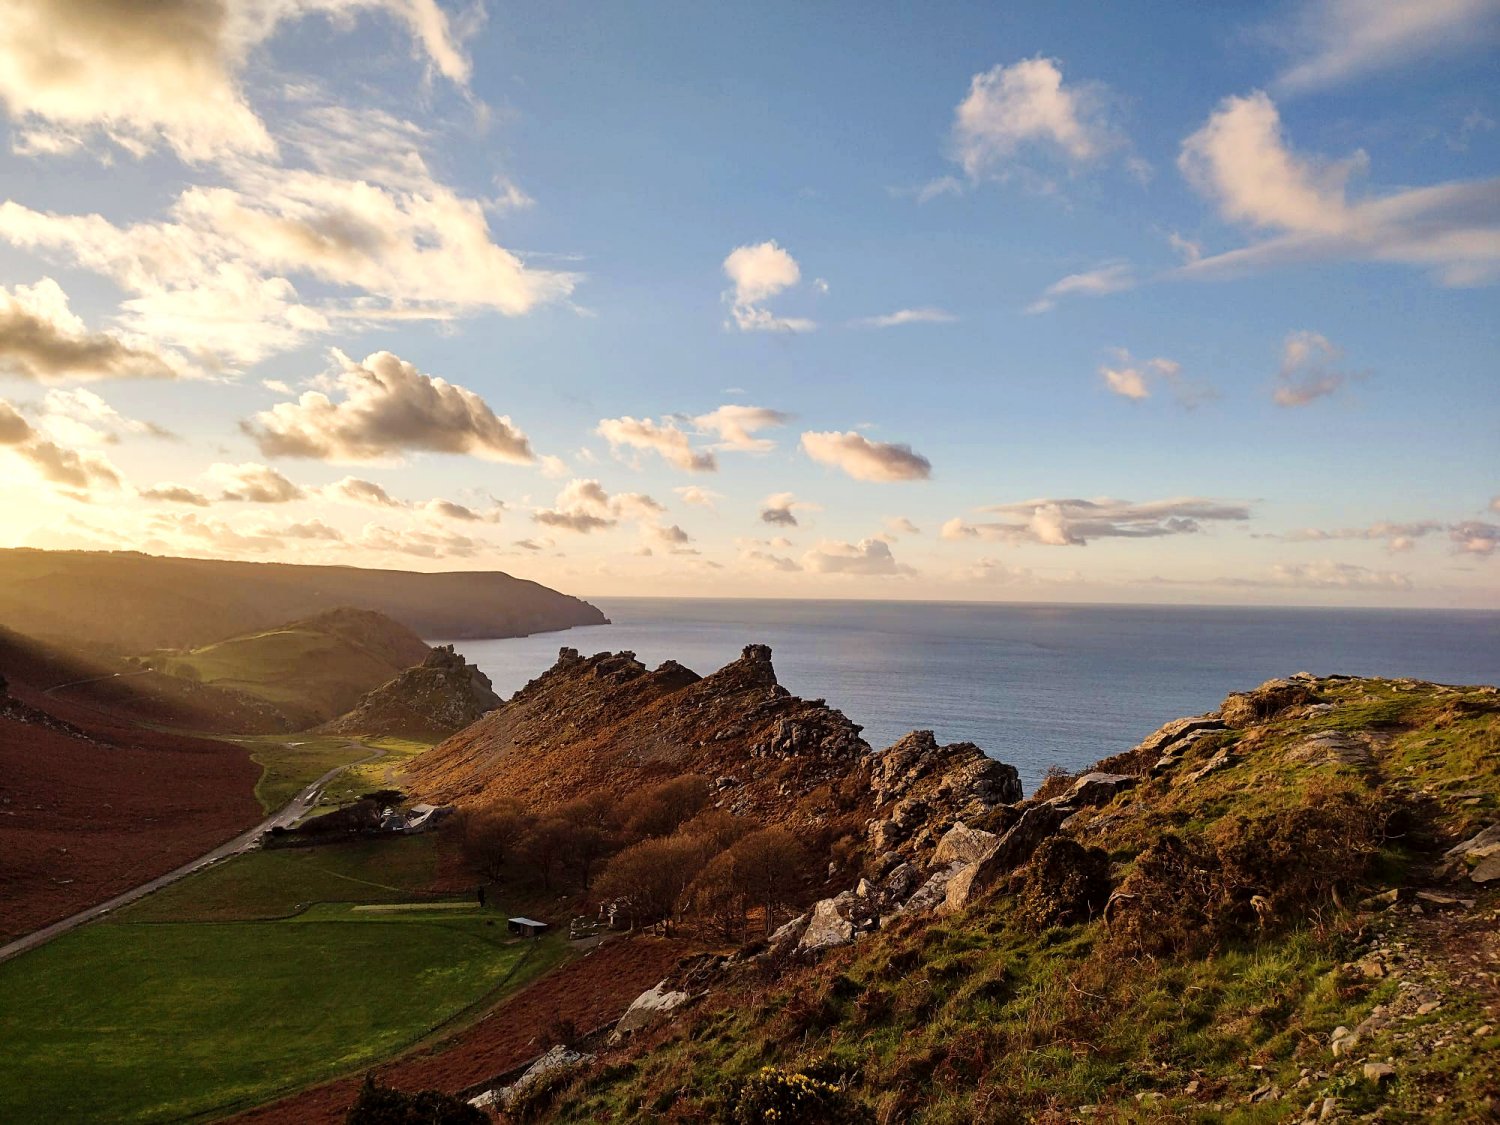 Valley of Rocks at sunset